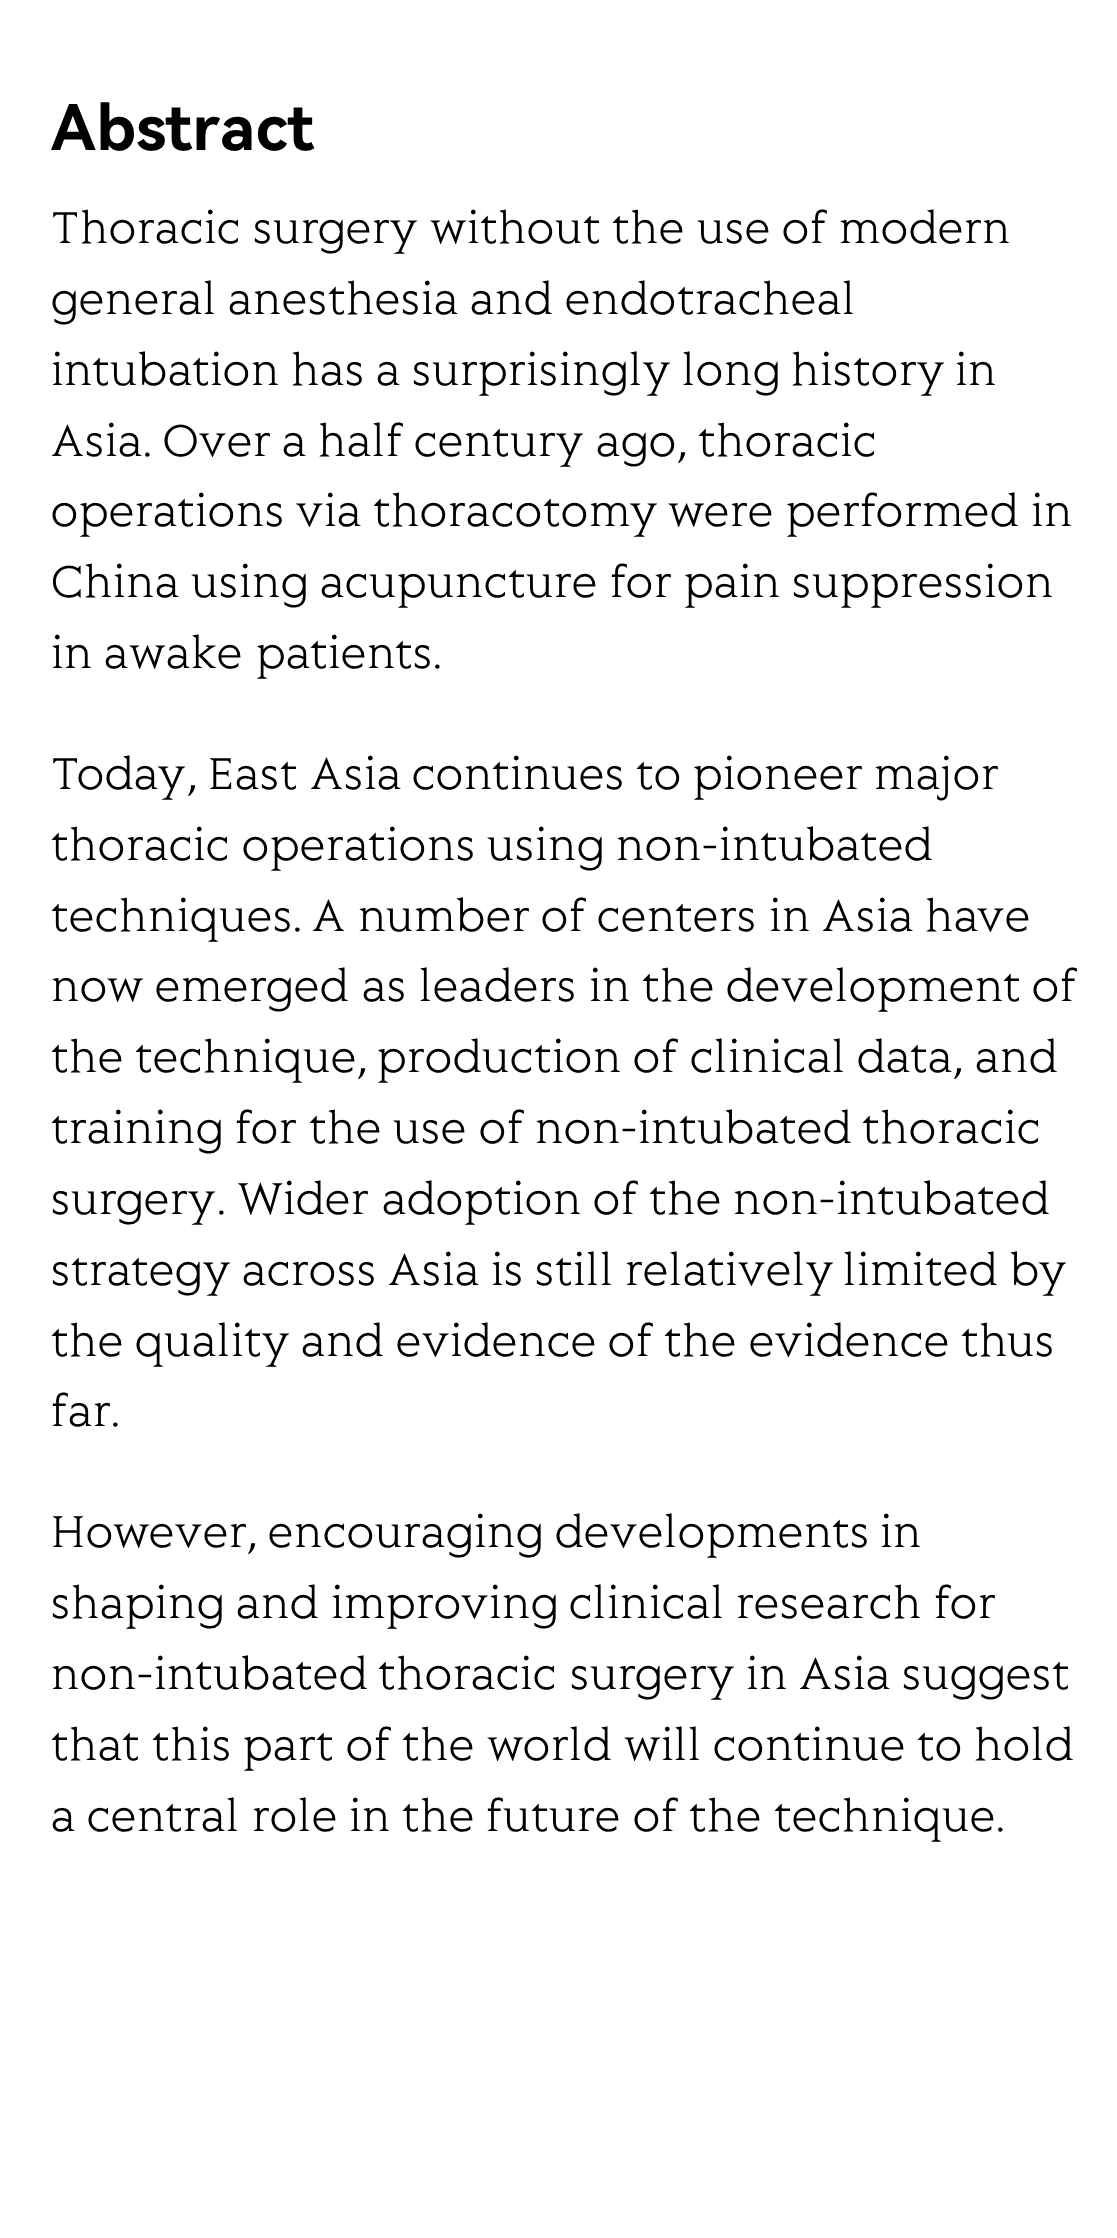 Non-intubated thoracic surgery: an Asian perspective_2